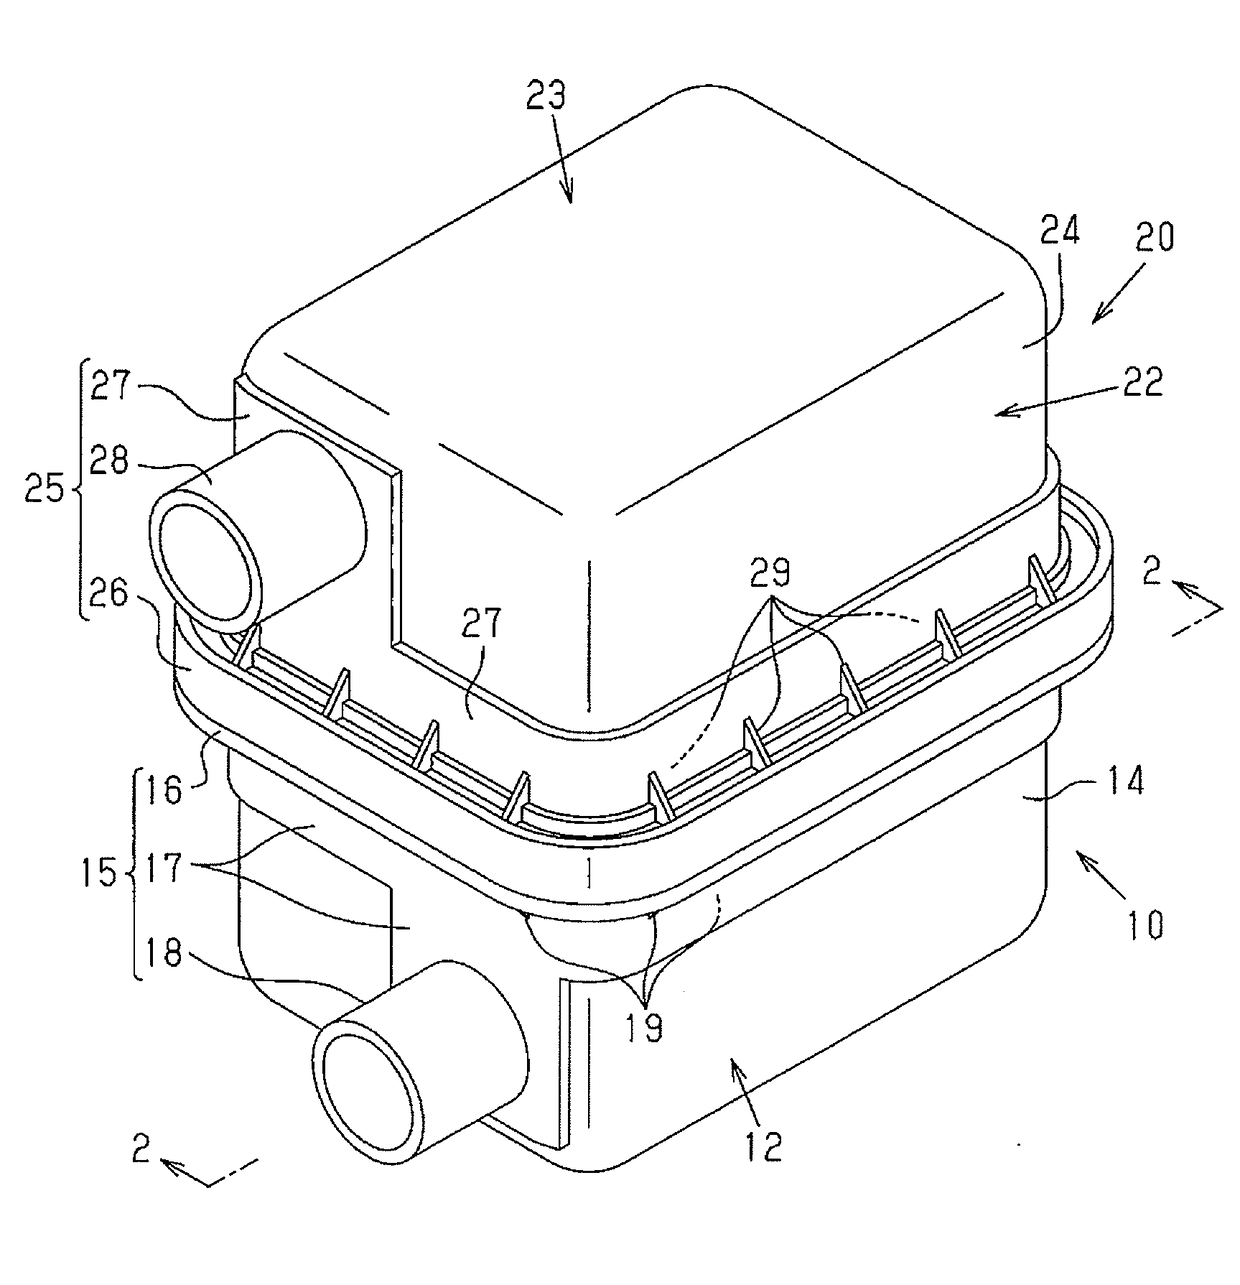 Air cleaner for internal combustion engine